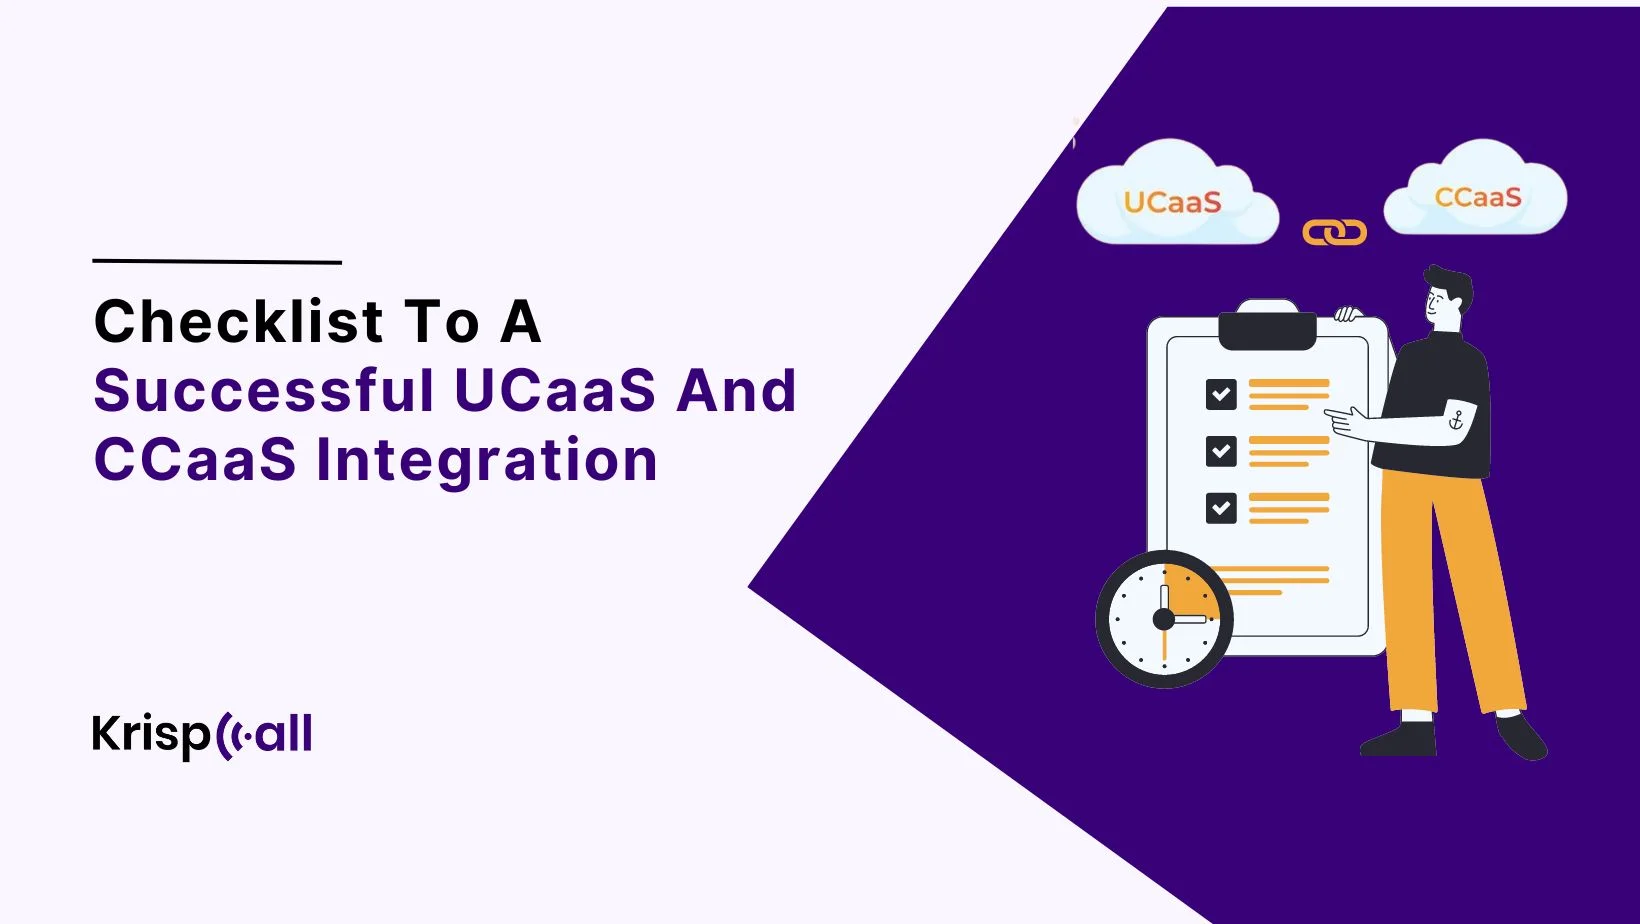 Checklist To A Successful UCaaS And CCaaS Integration